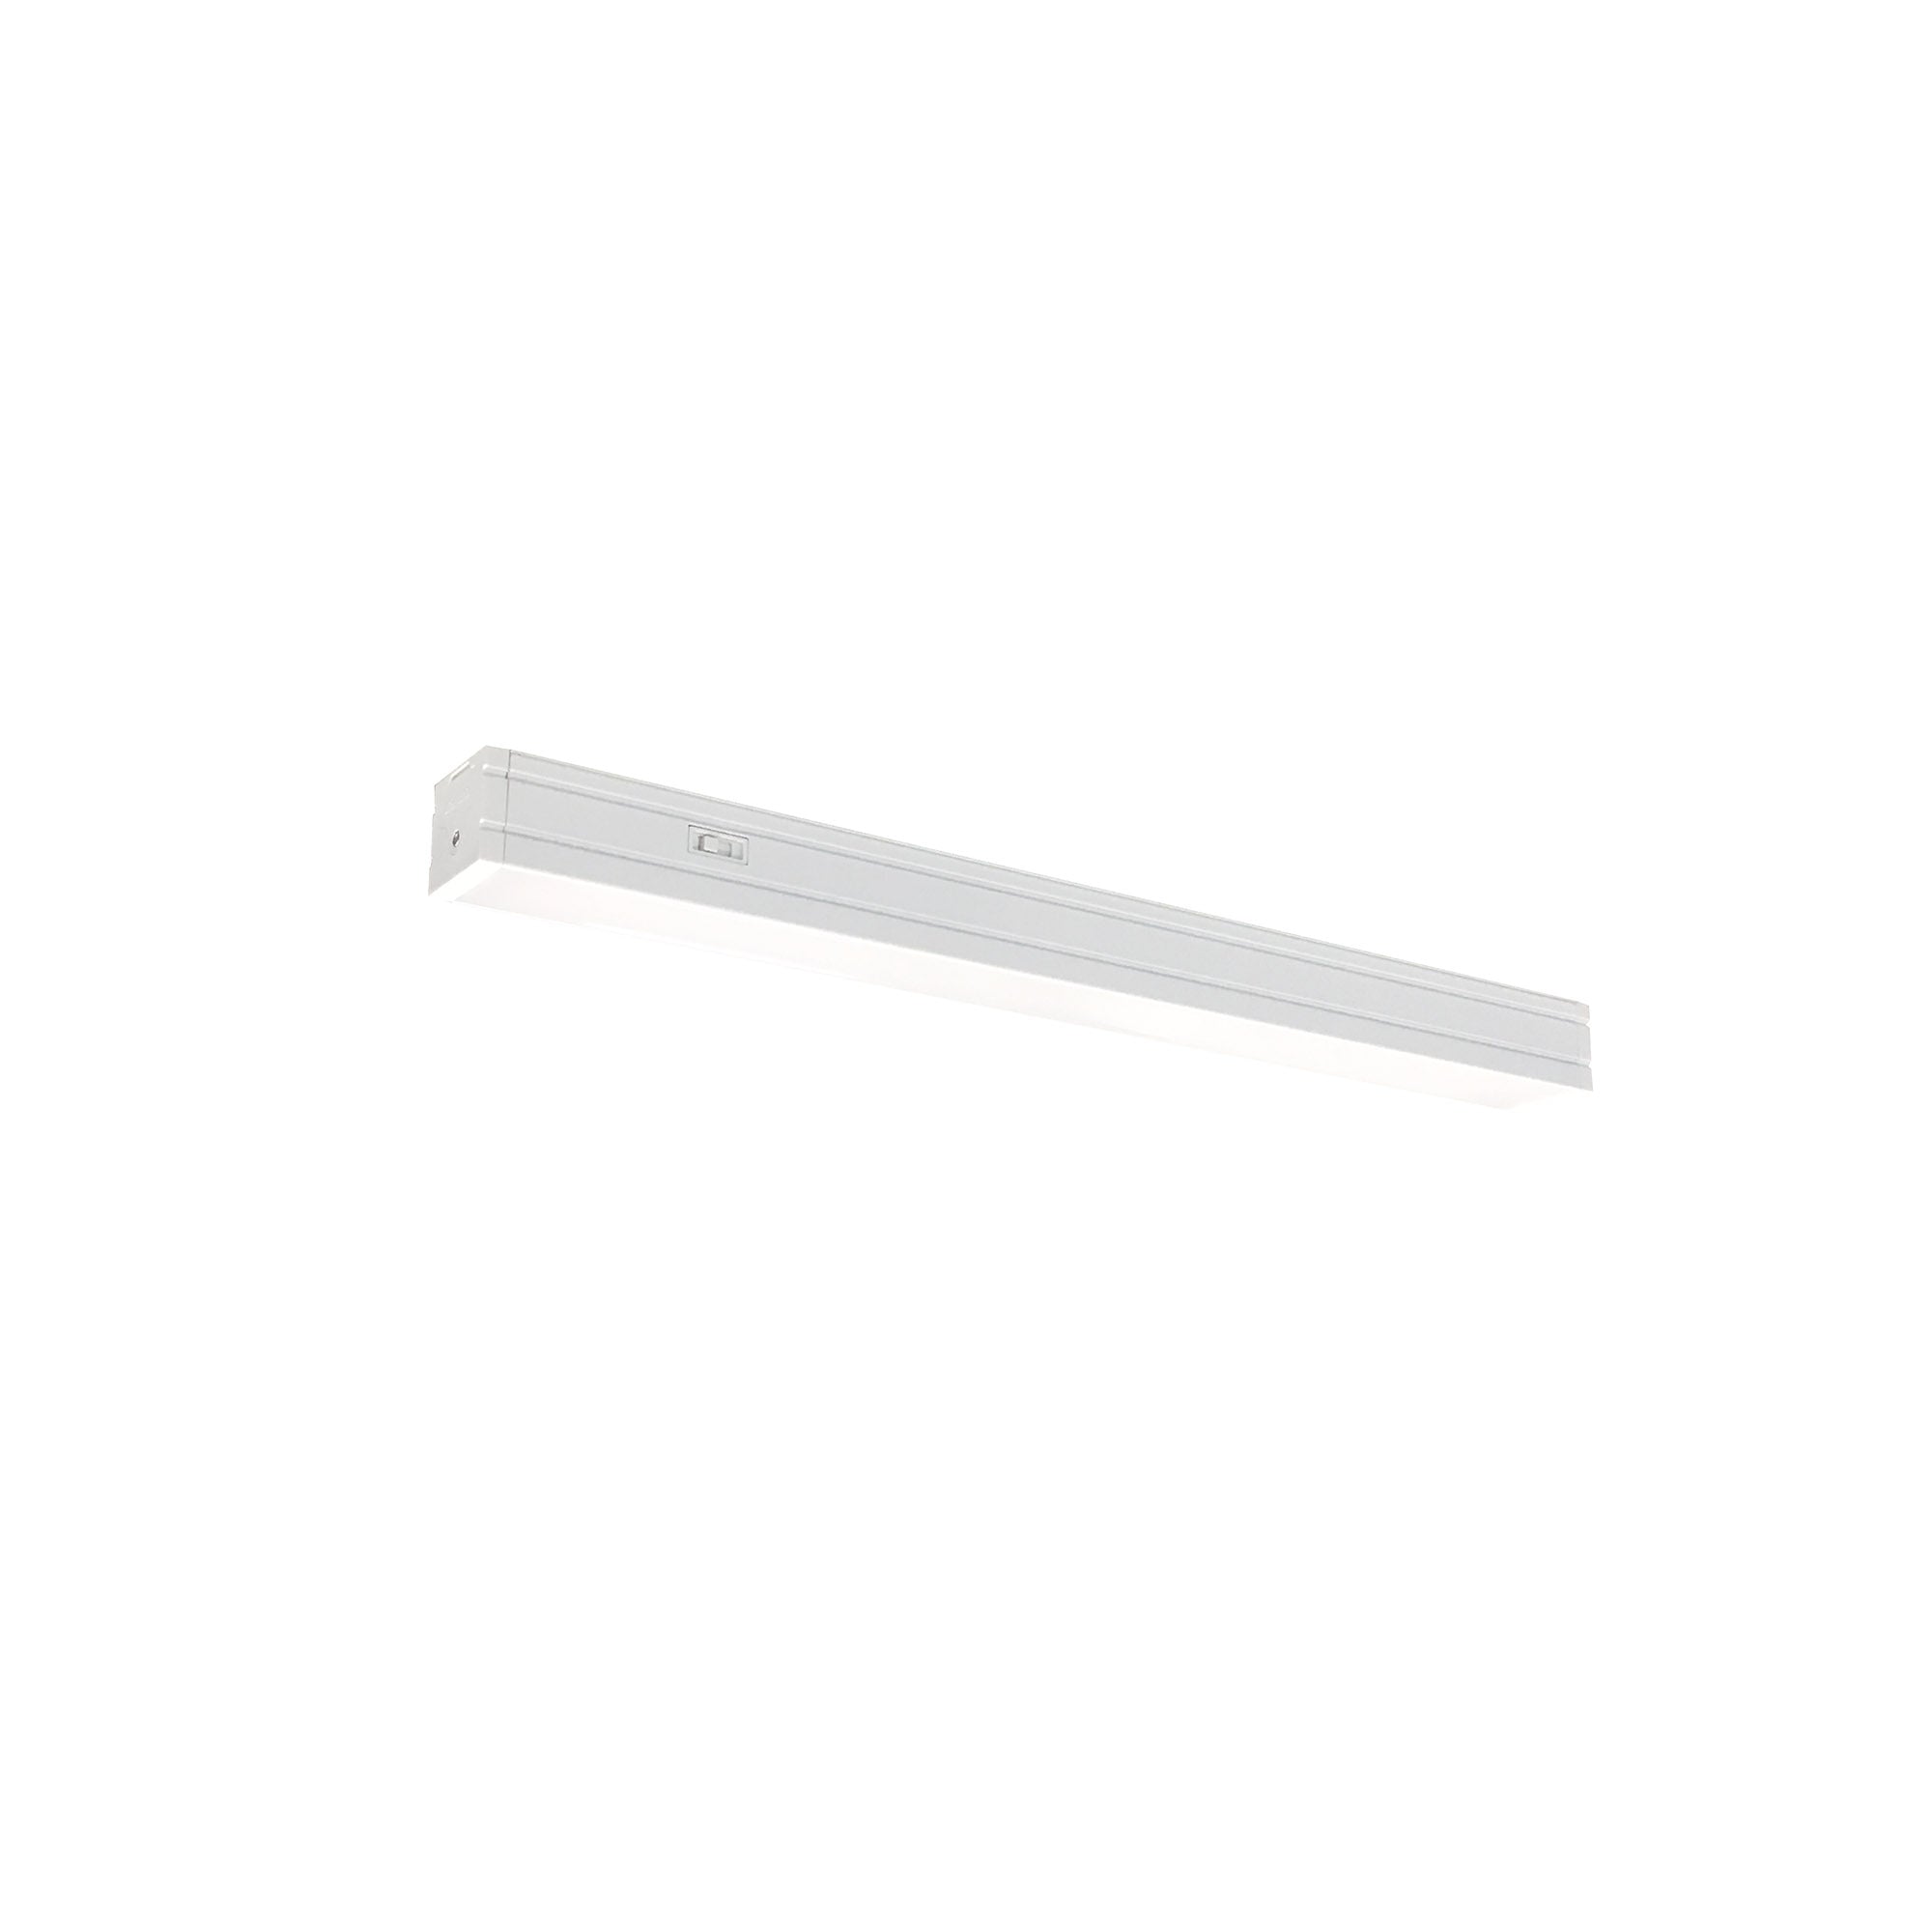 Nora Lighting NUDTW-9812/W - Accent / Undercabinet - 12 Inch Bravo FROST Tunable White LED Linear, 3000/3500/4000K, White